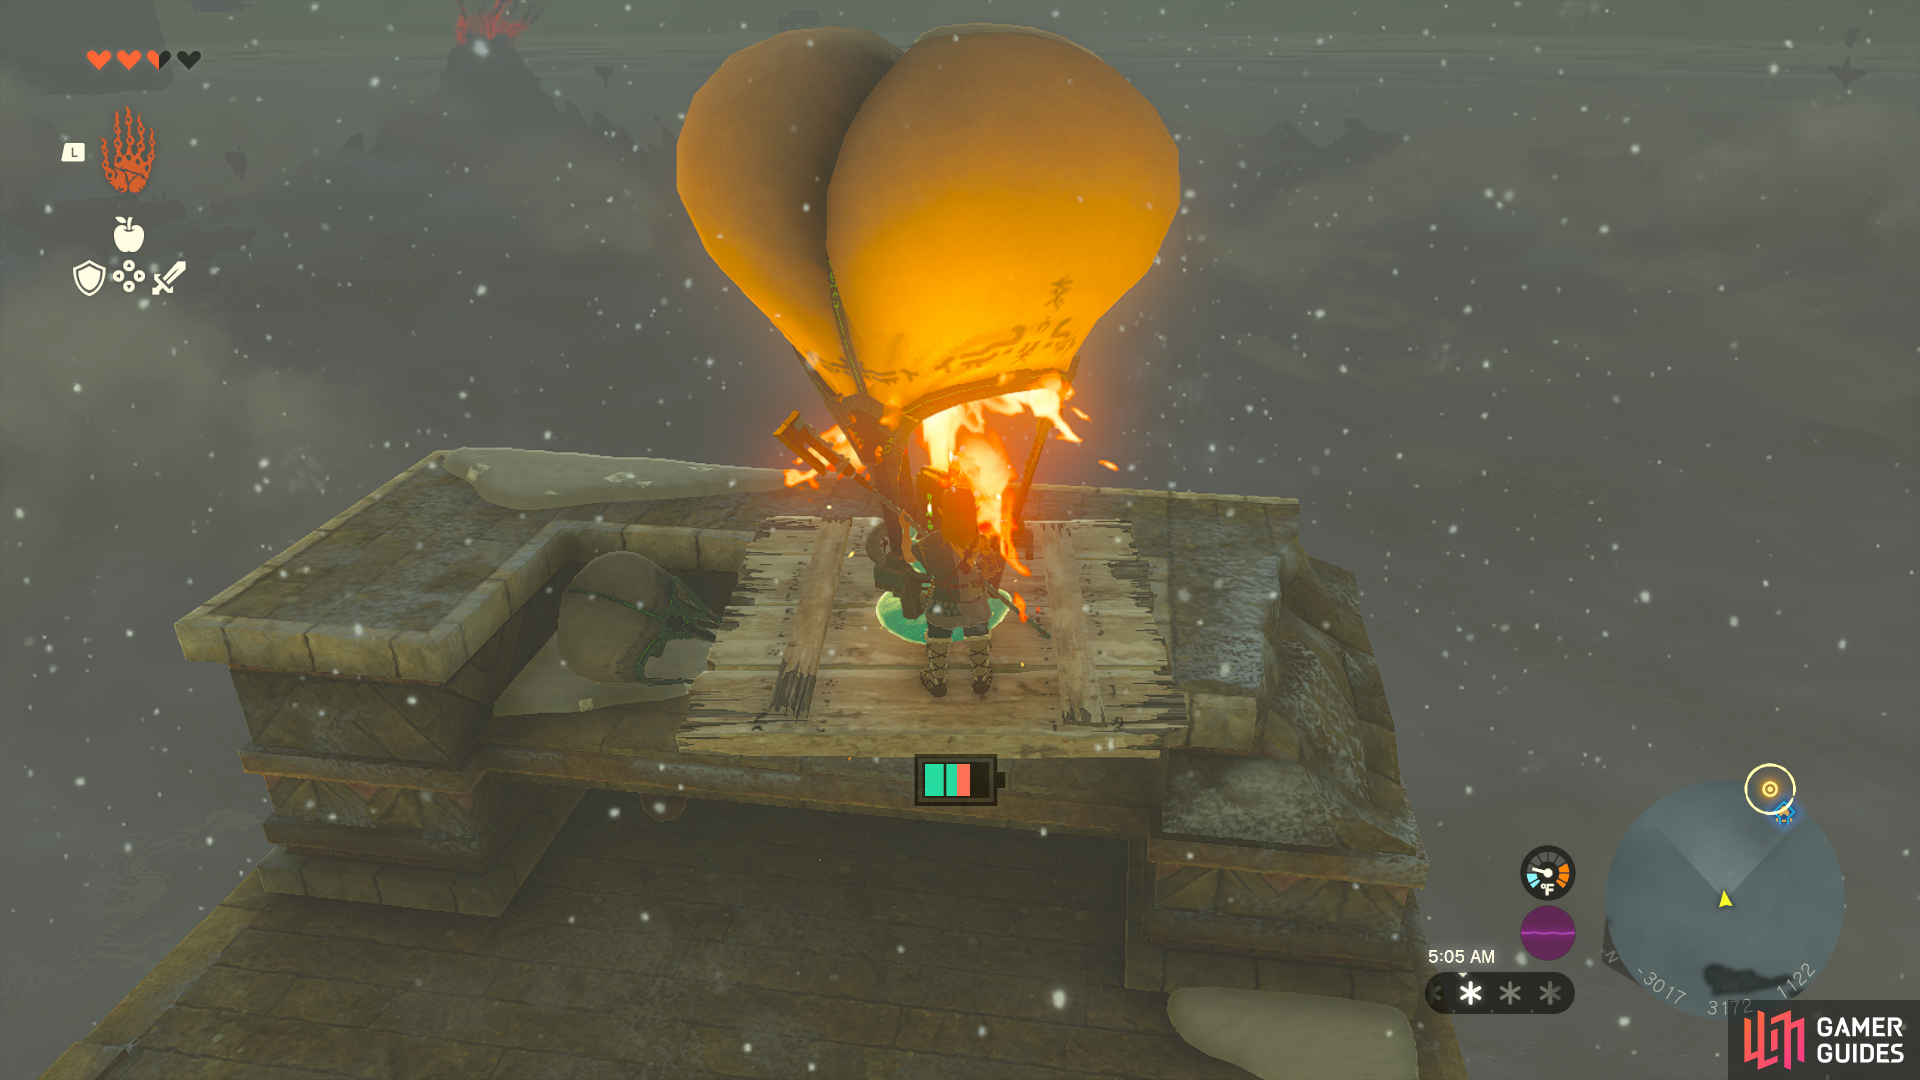 When your ready to ascend, hit the dragon head with a weapon to ignite the balloon.